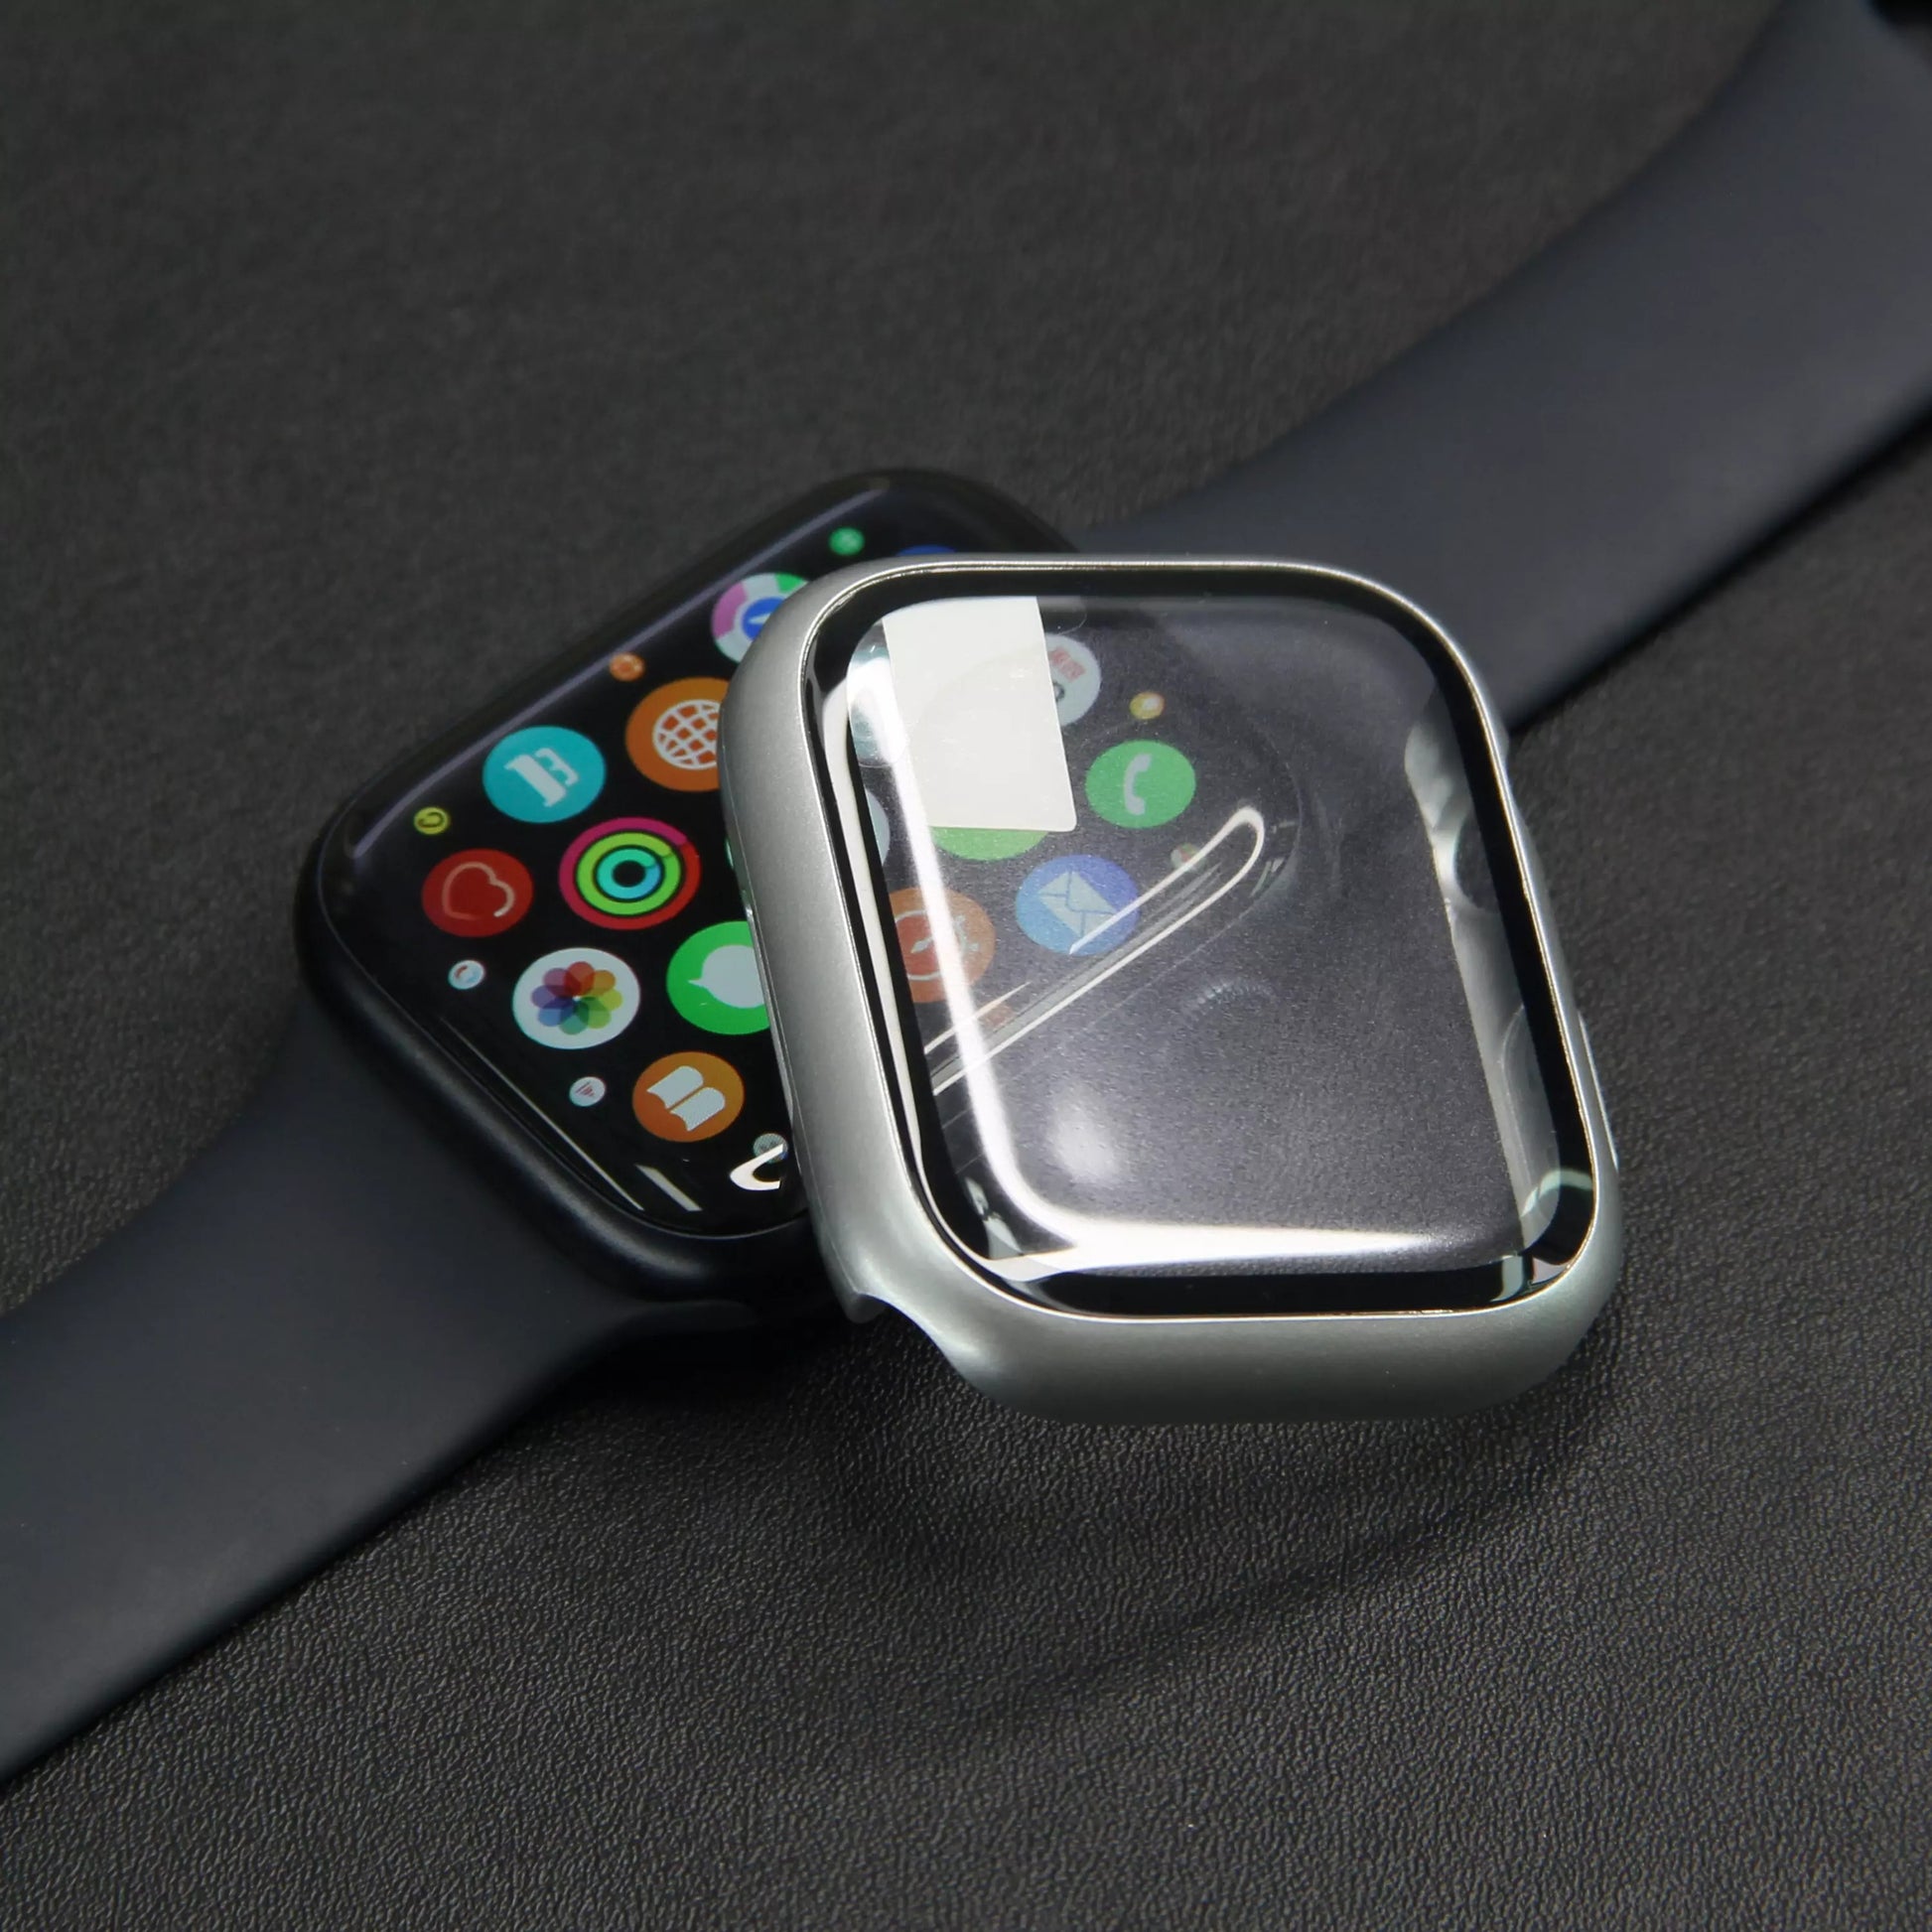 Premium Bumper Case Built in Screen Protector By iSerieshub For Smart Watch